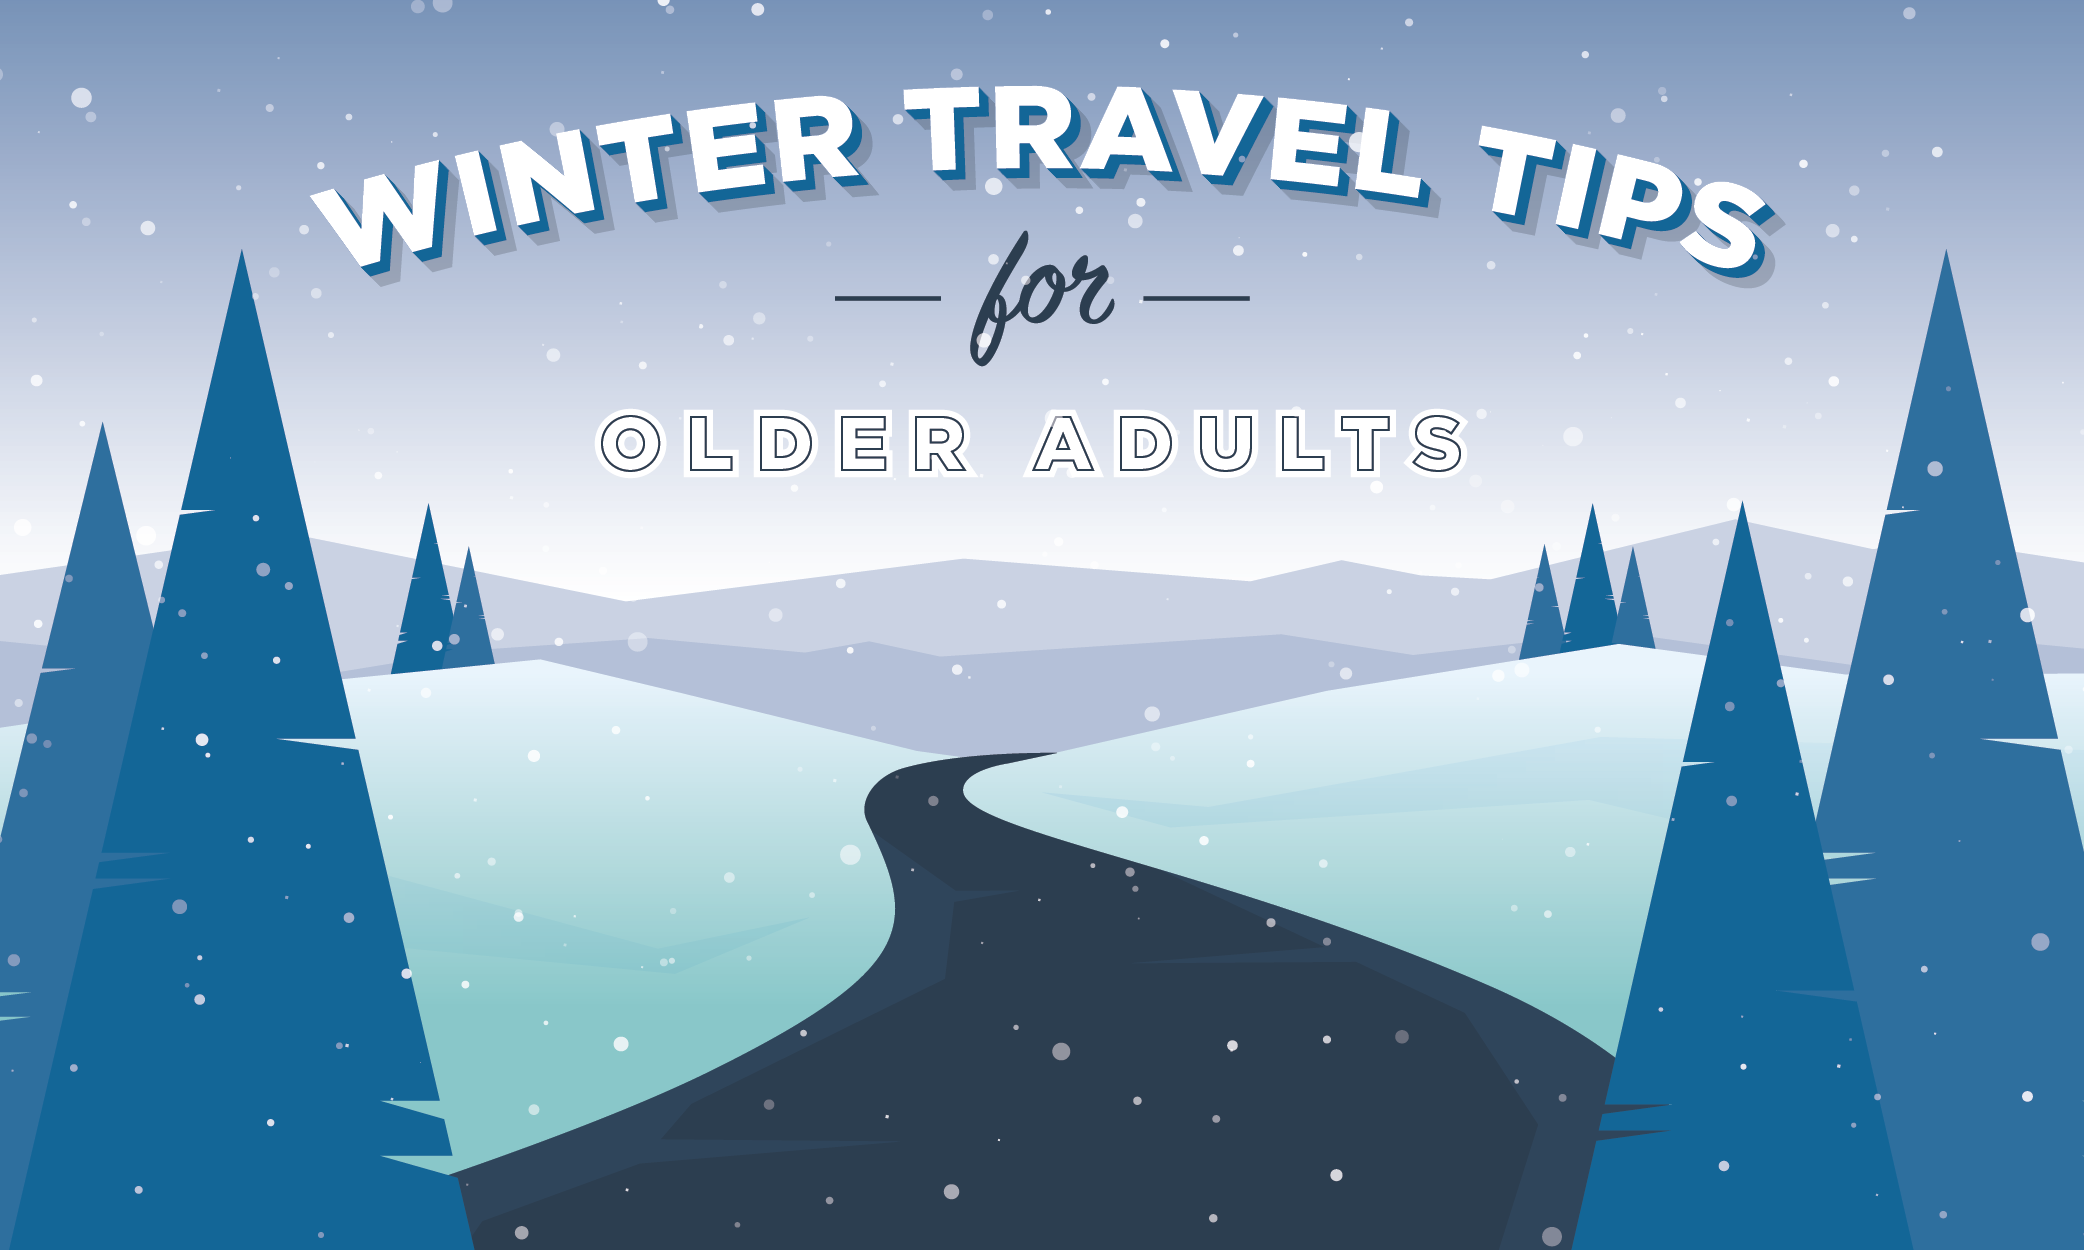 Winter Travel Tips for Older Adults [Infographic]